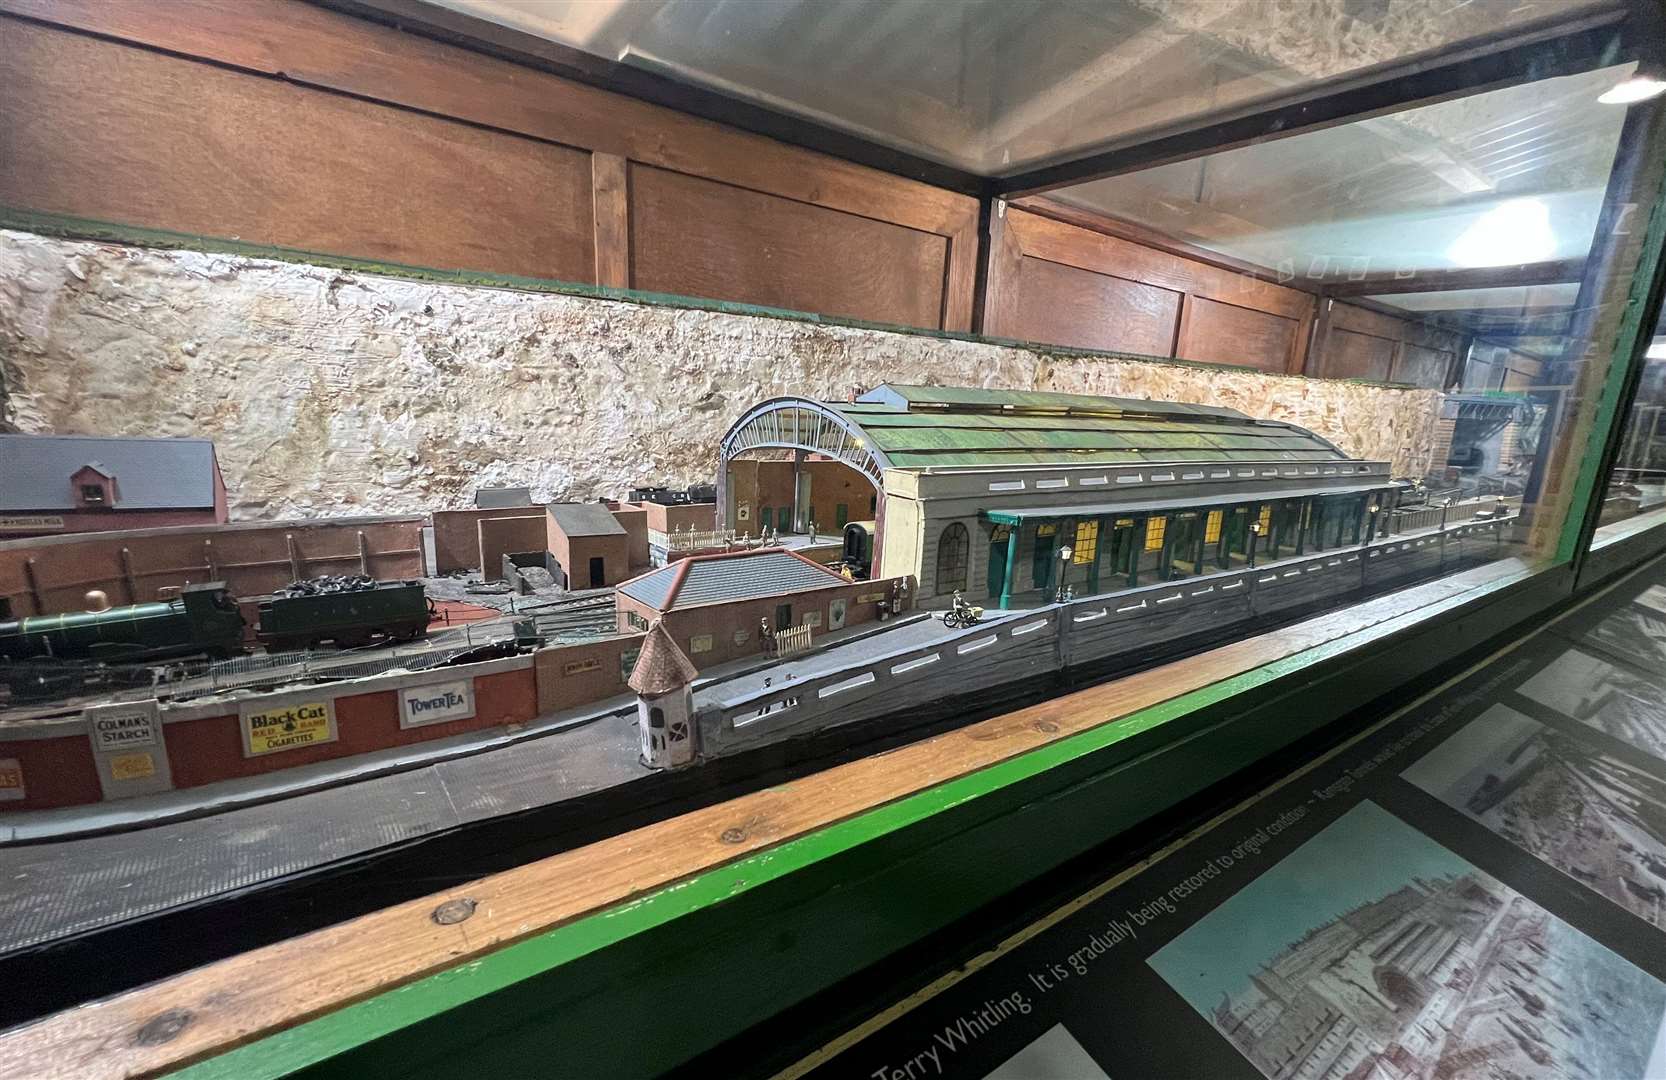 A model of the old Ramsgate Harbour station is in the entrance to the Ramsgate Tunnels and gives a sense of the scale of the site